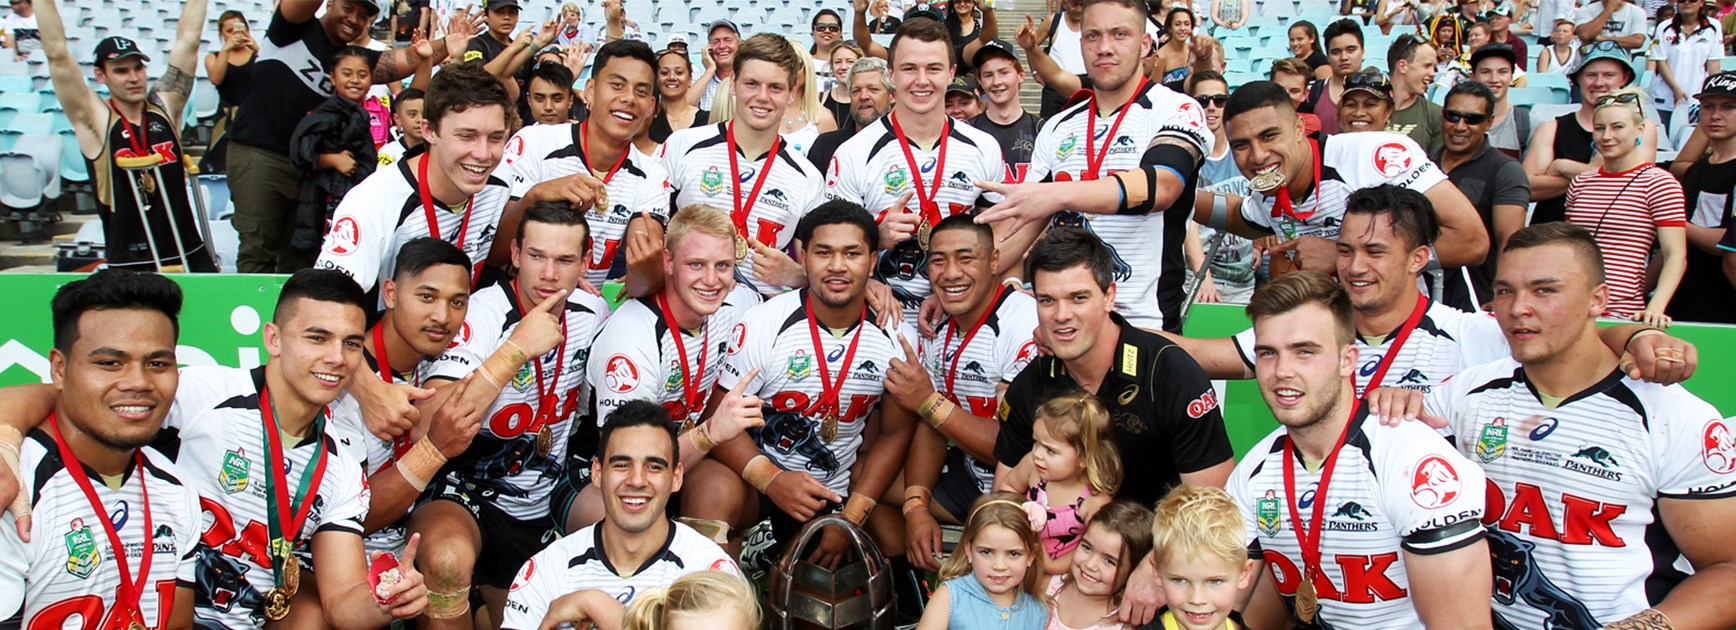 2015 NYC Holden Cup champions the Penrith Panthers.